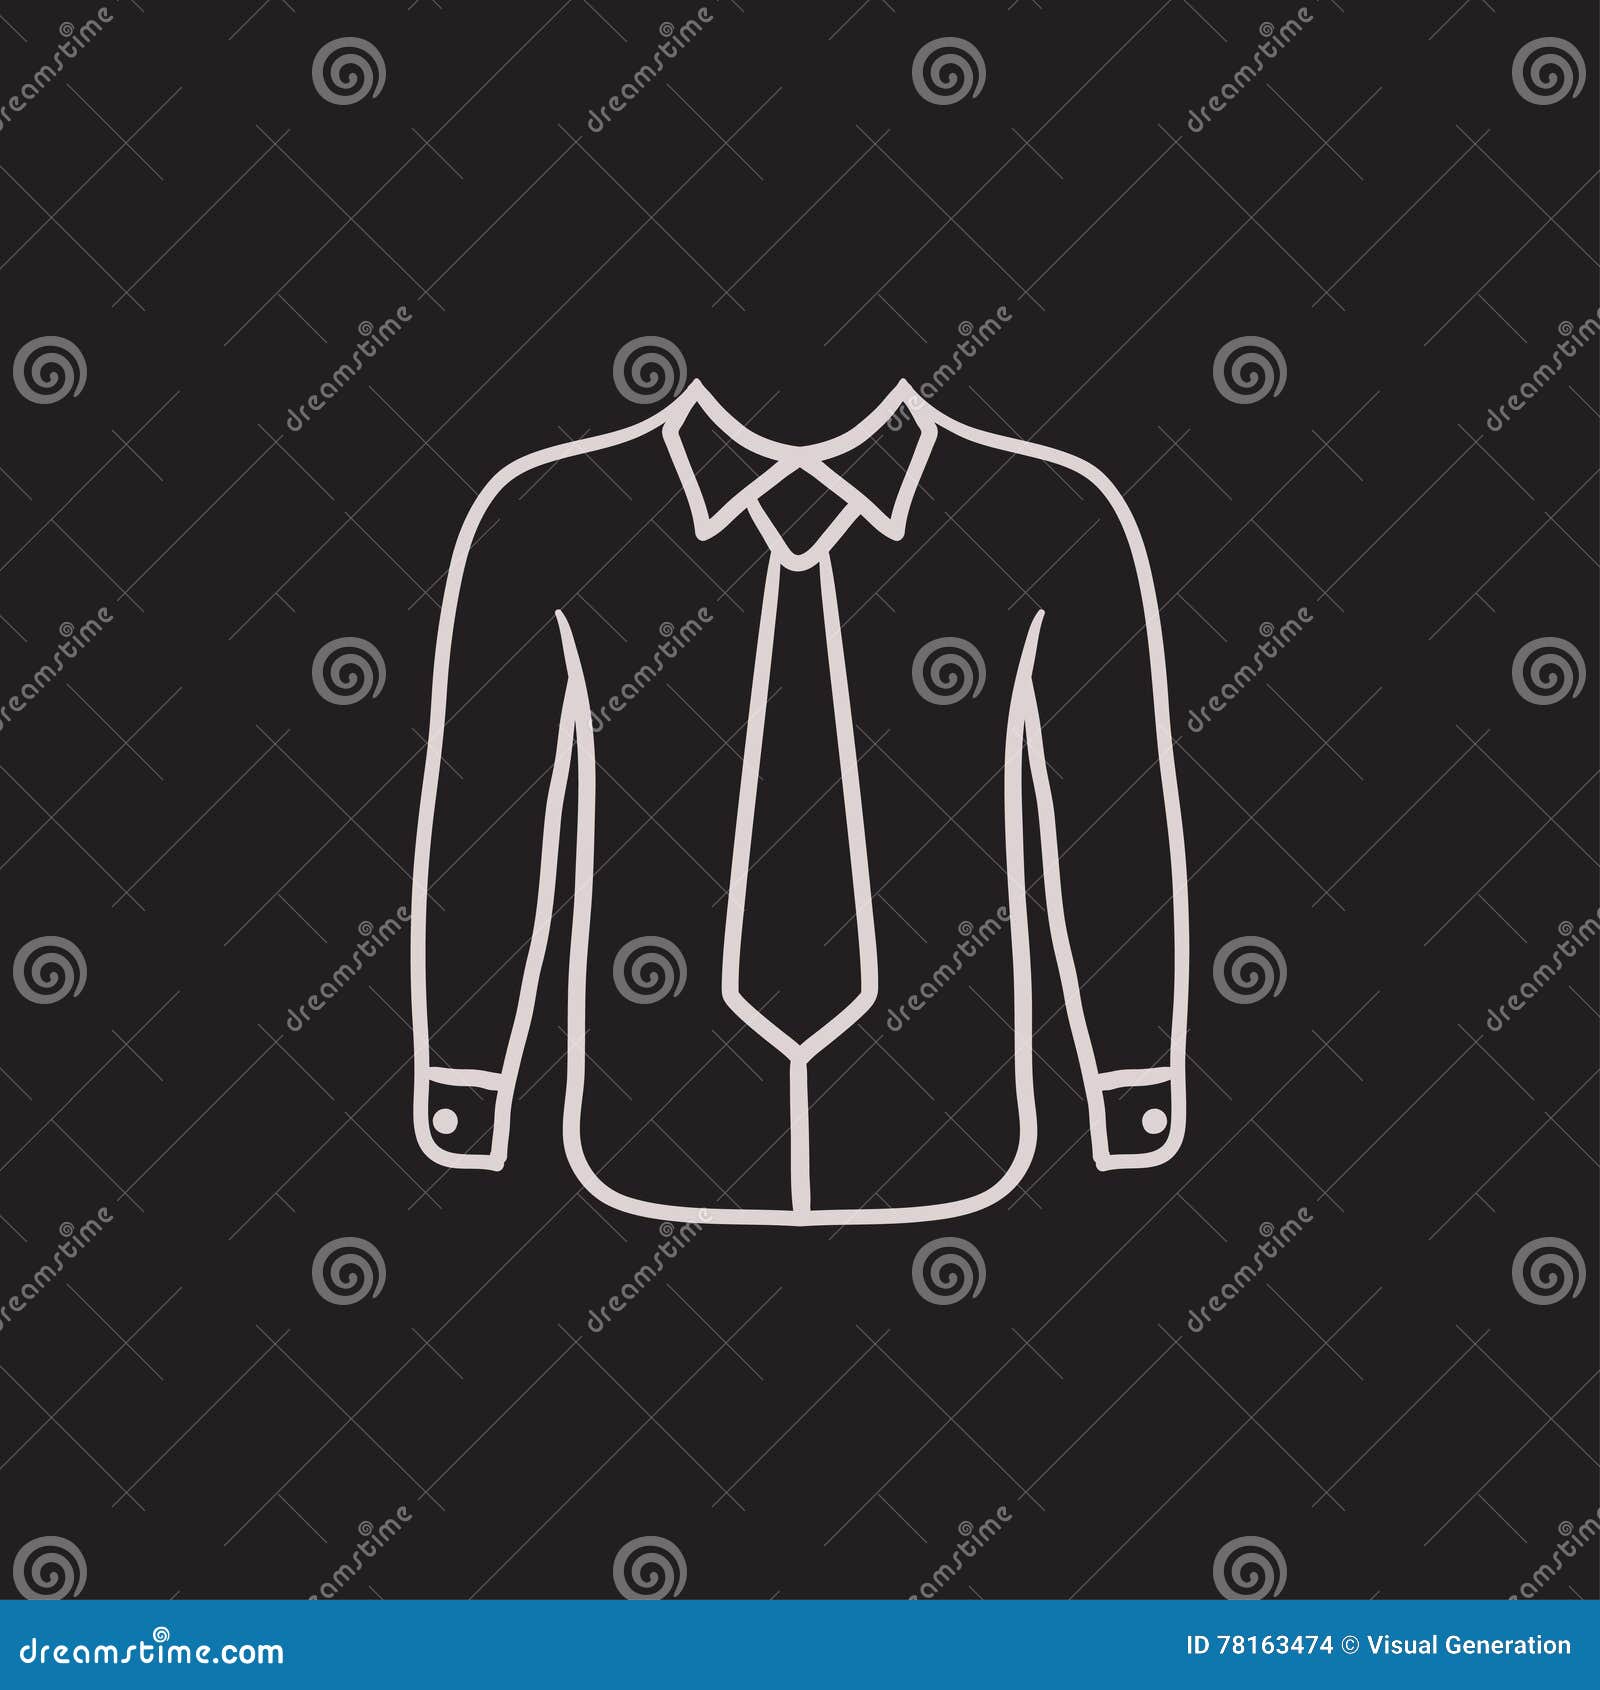 Shirt With Tie Sketch Icon. Stock Vector Illustration of